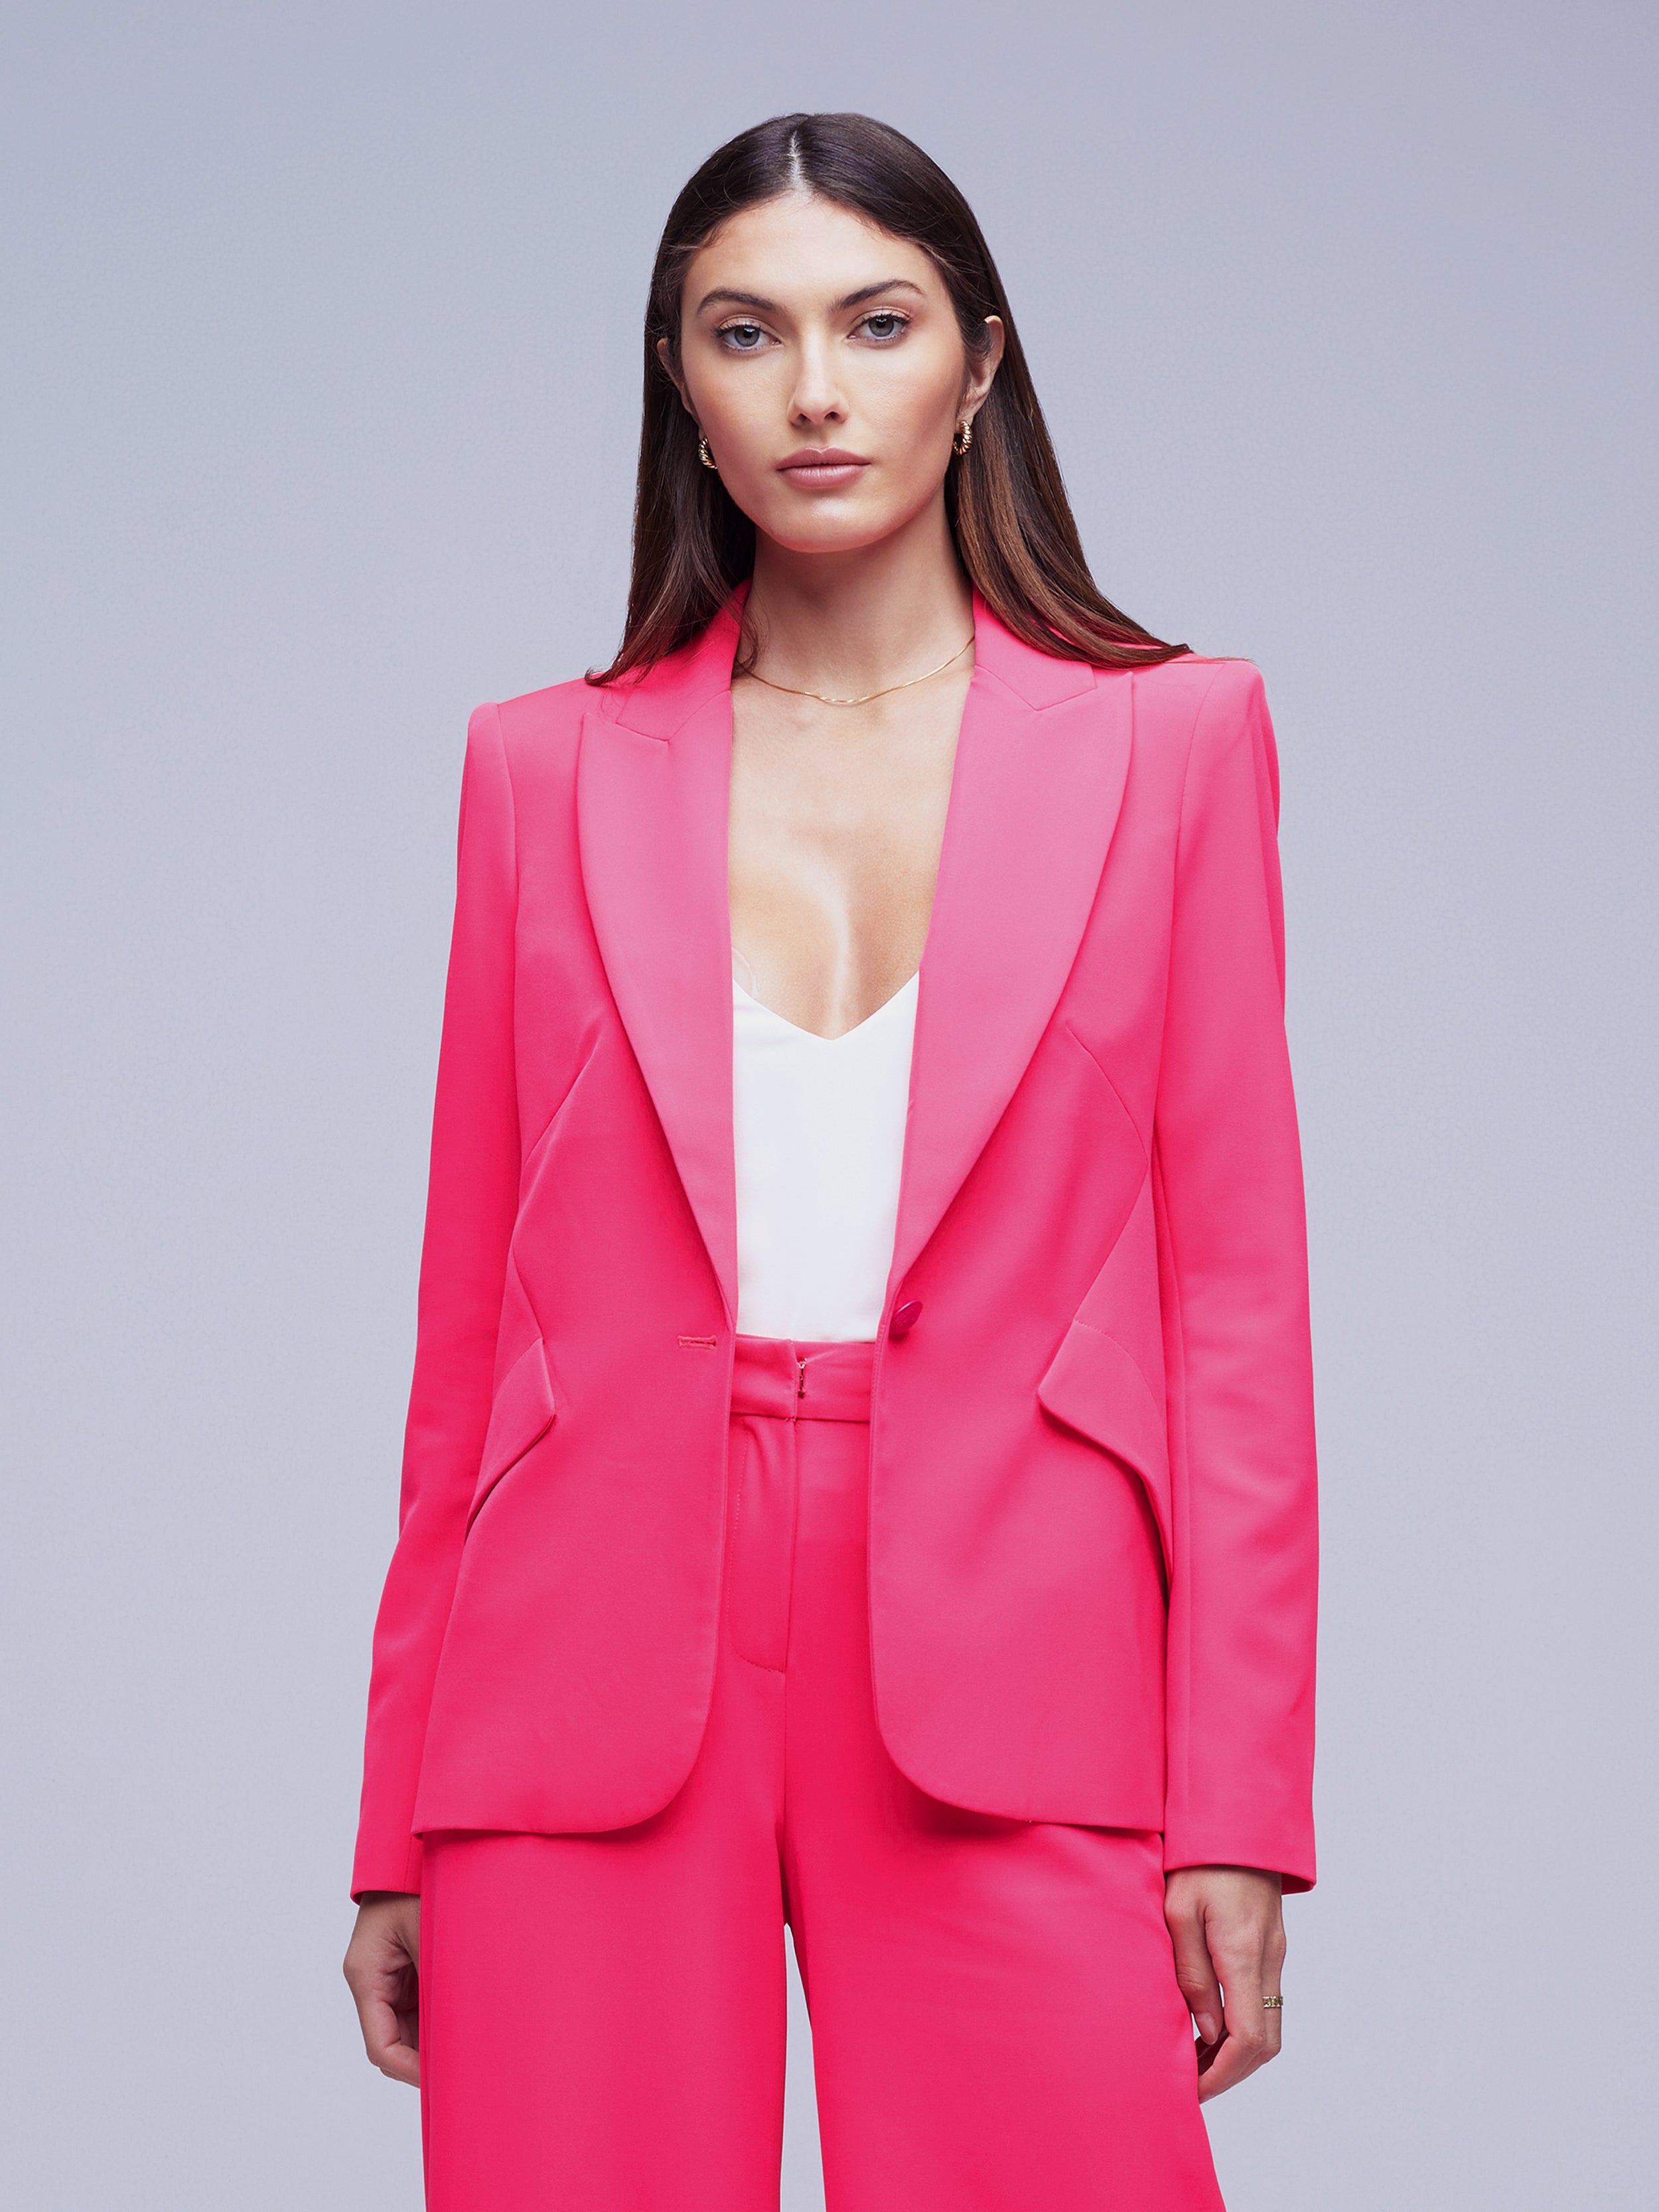 Coral Pink Pants Suit for Women, Office Pant Suit Set Women, Blazer Suit  Set Women, High Waist Straight Pants, Blazer and Trousers Women -   Denmark